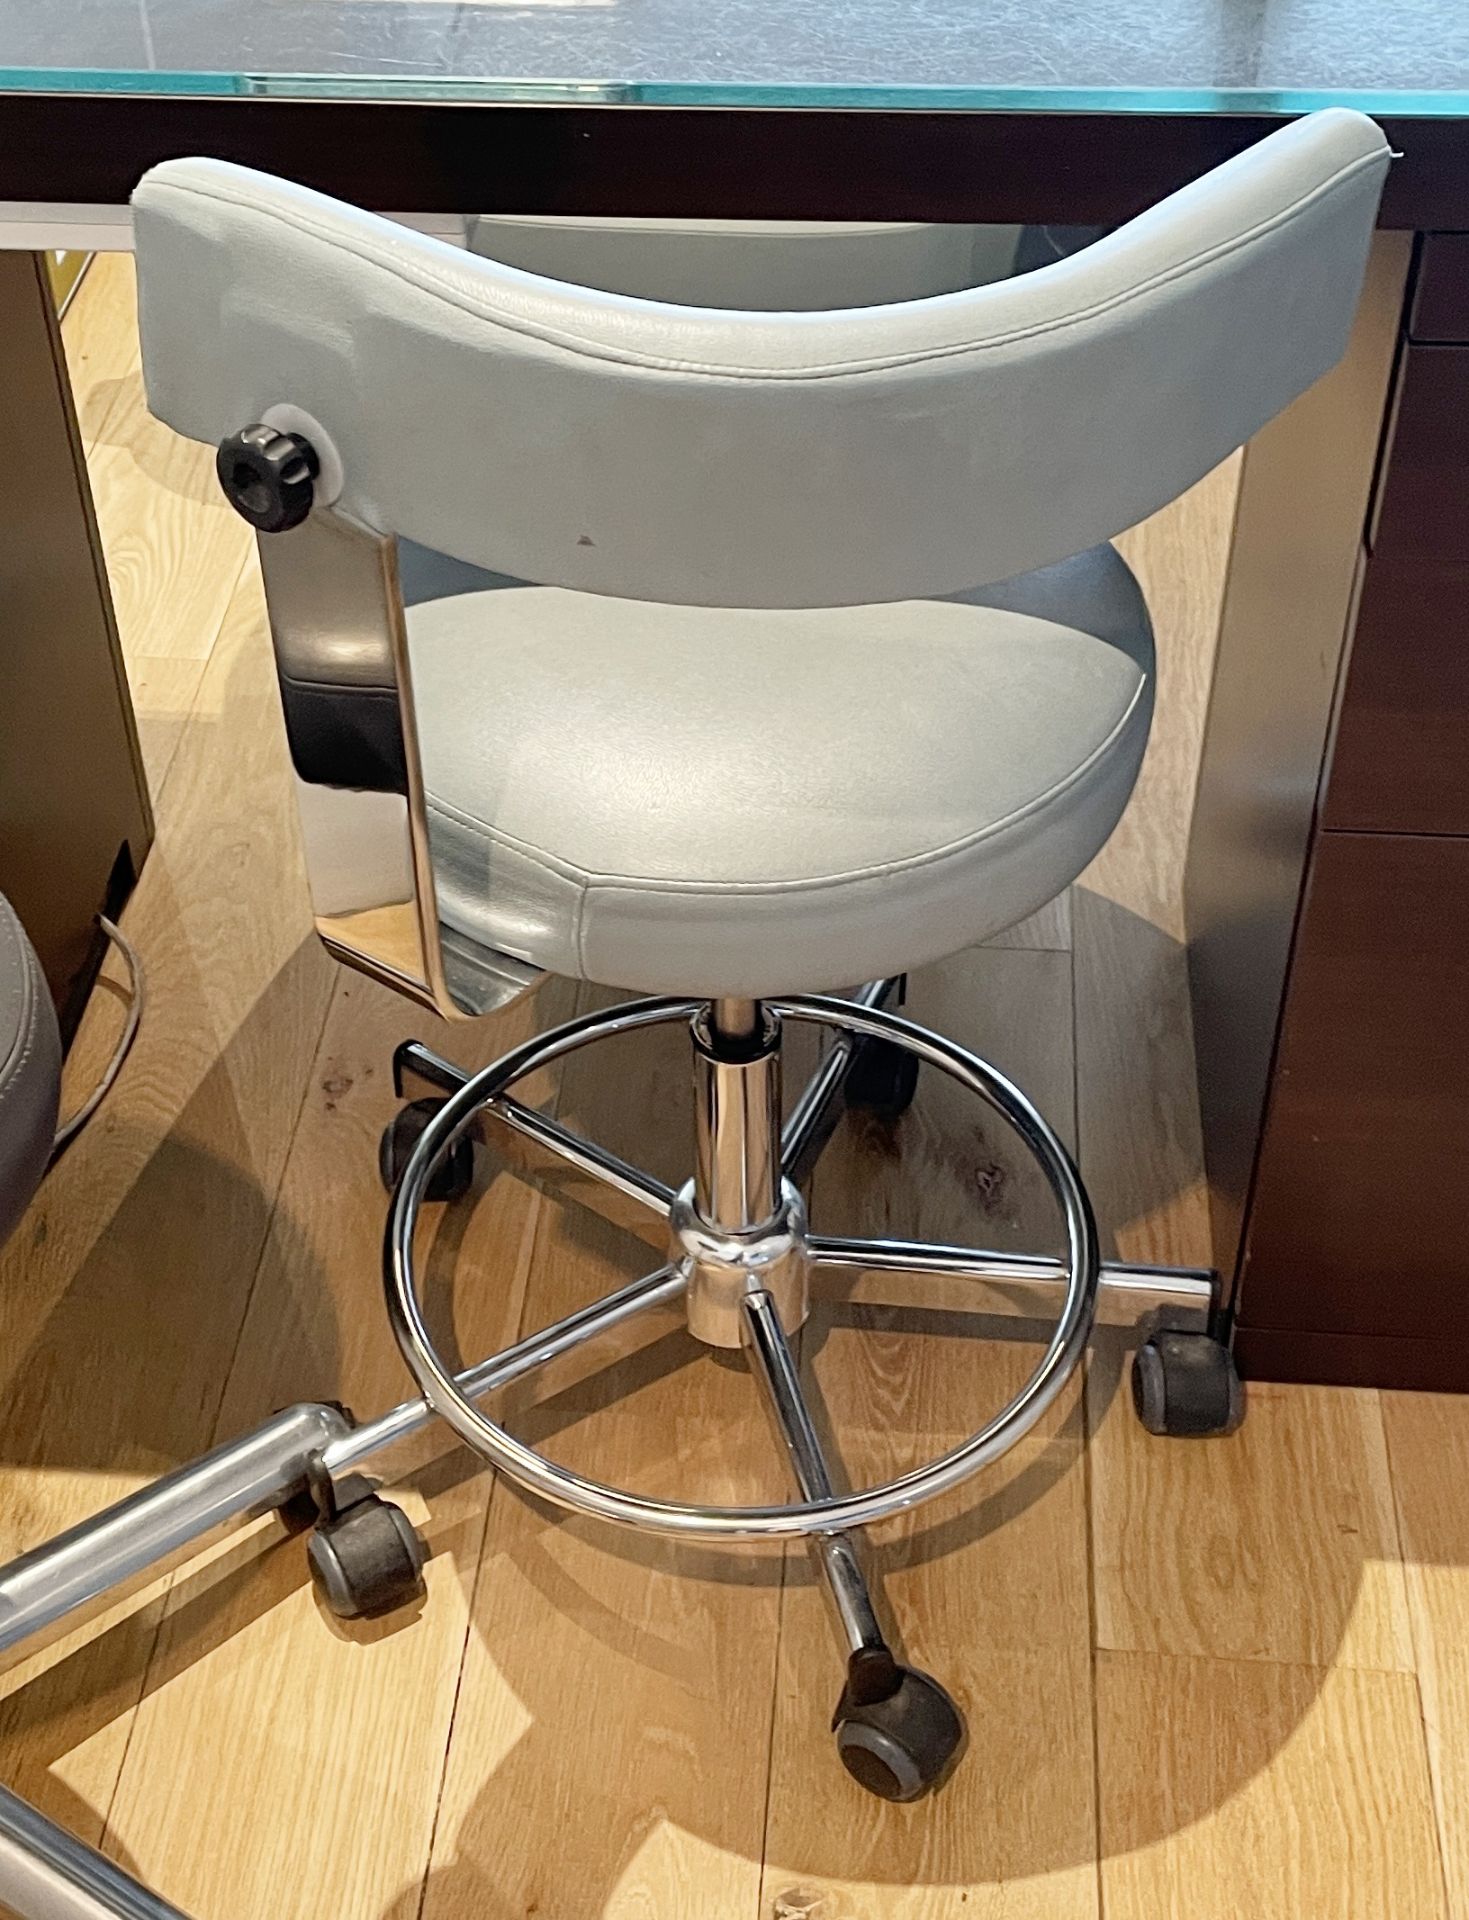 4 x Upholstered Gas Lift Treatment Stools - Dimensions: W47 x D49 x H72-85cm - Ref: MHB102 - CL670 - - Image 2 of 7